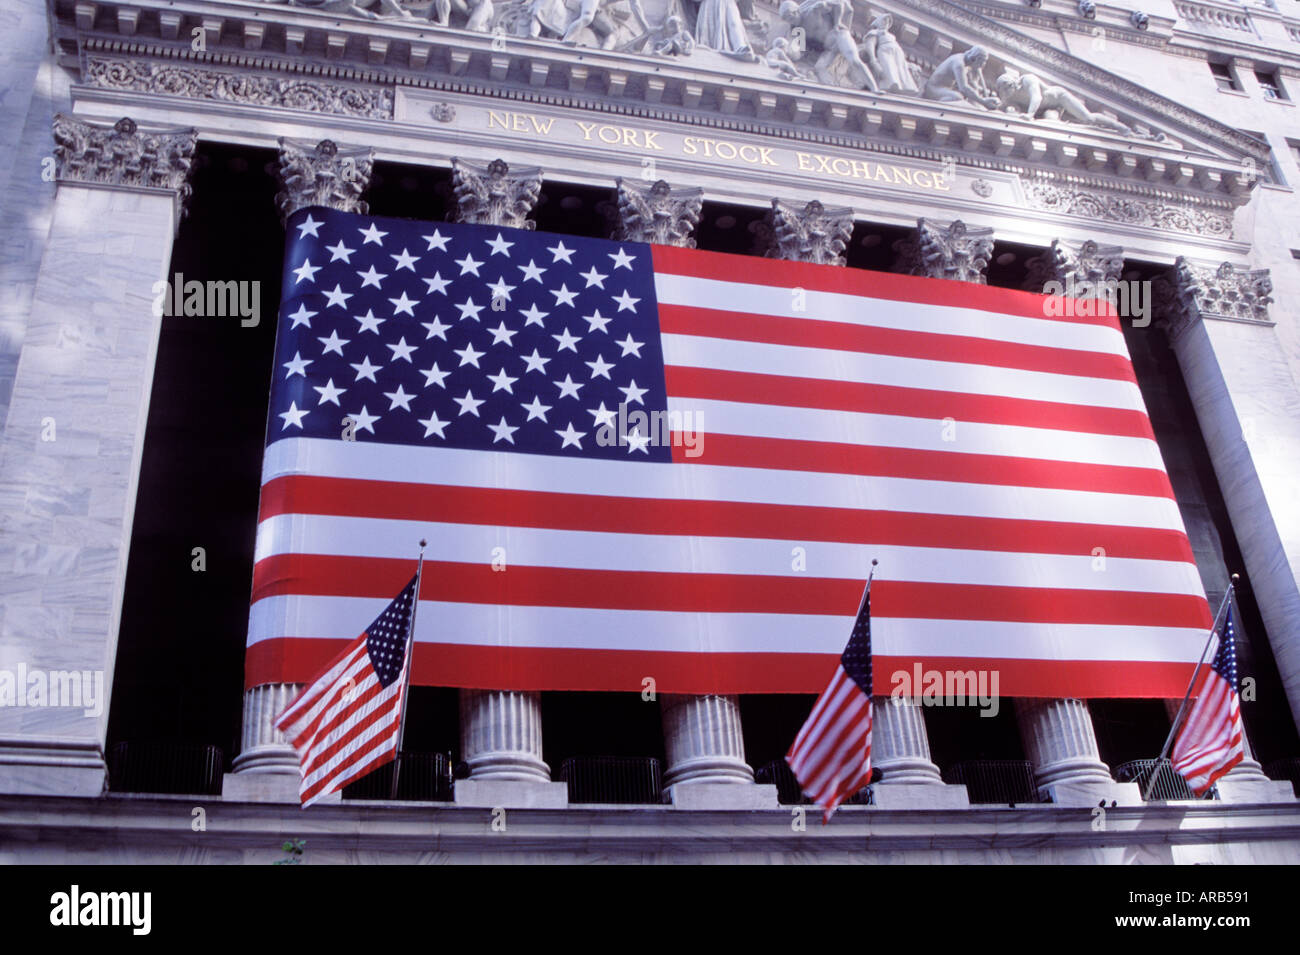 The New York Stock Exchange dressed with the American flag New York